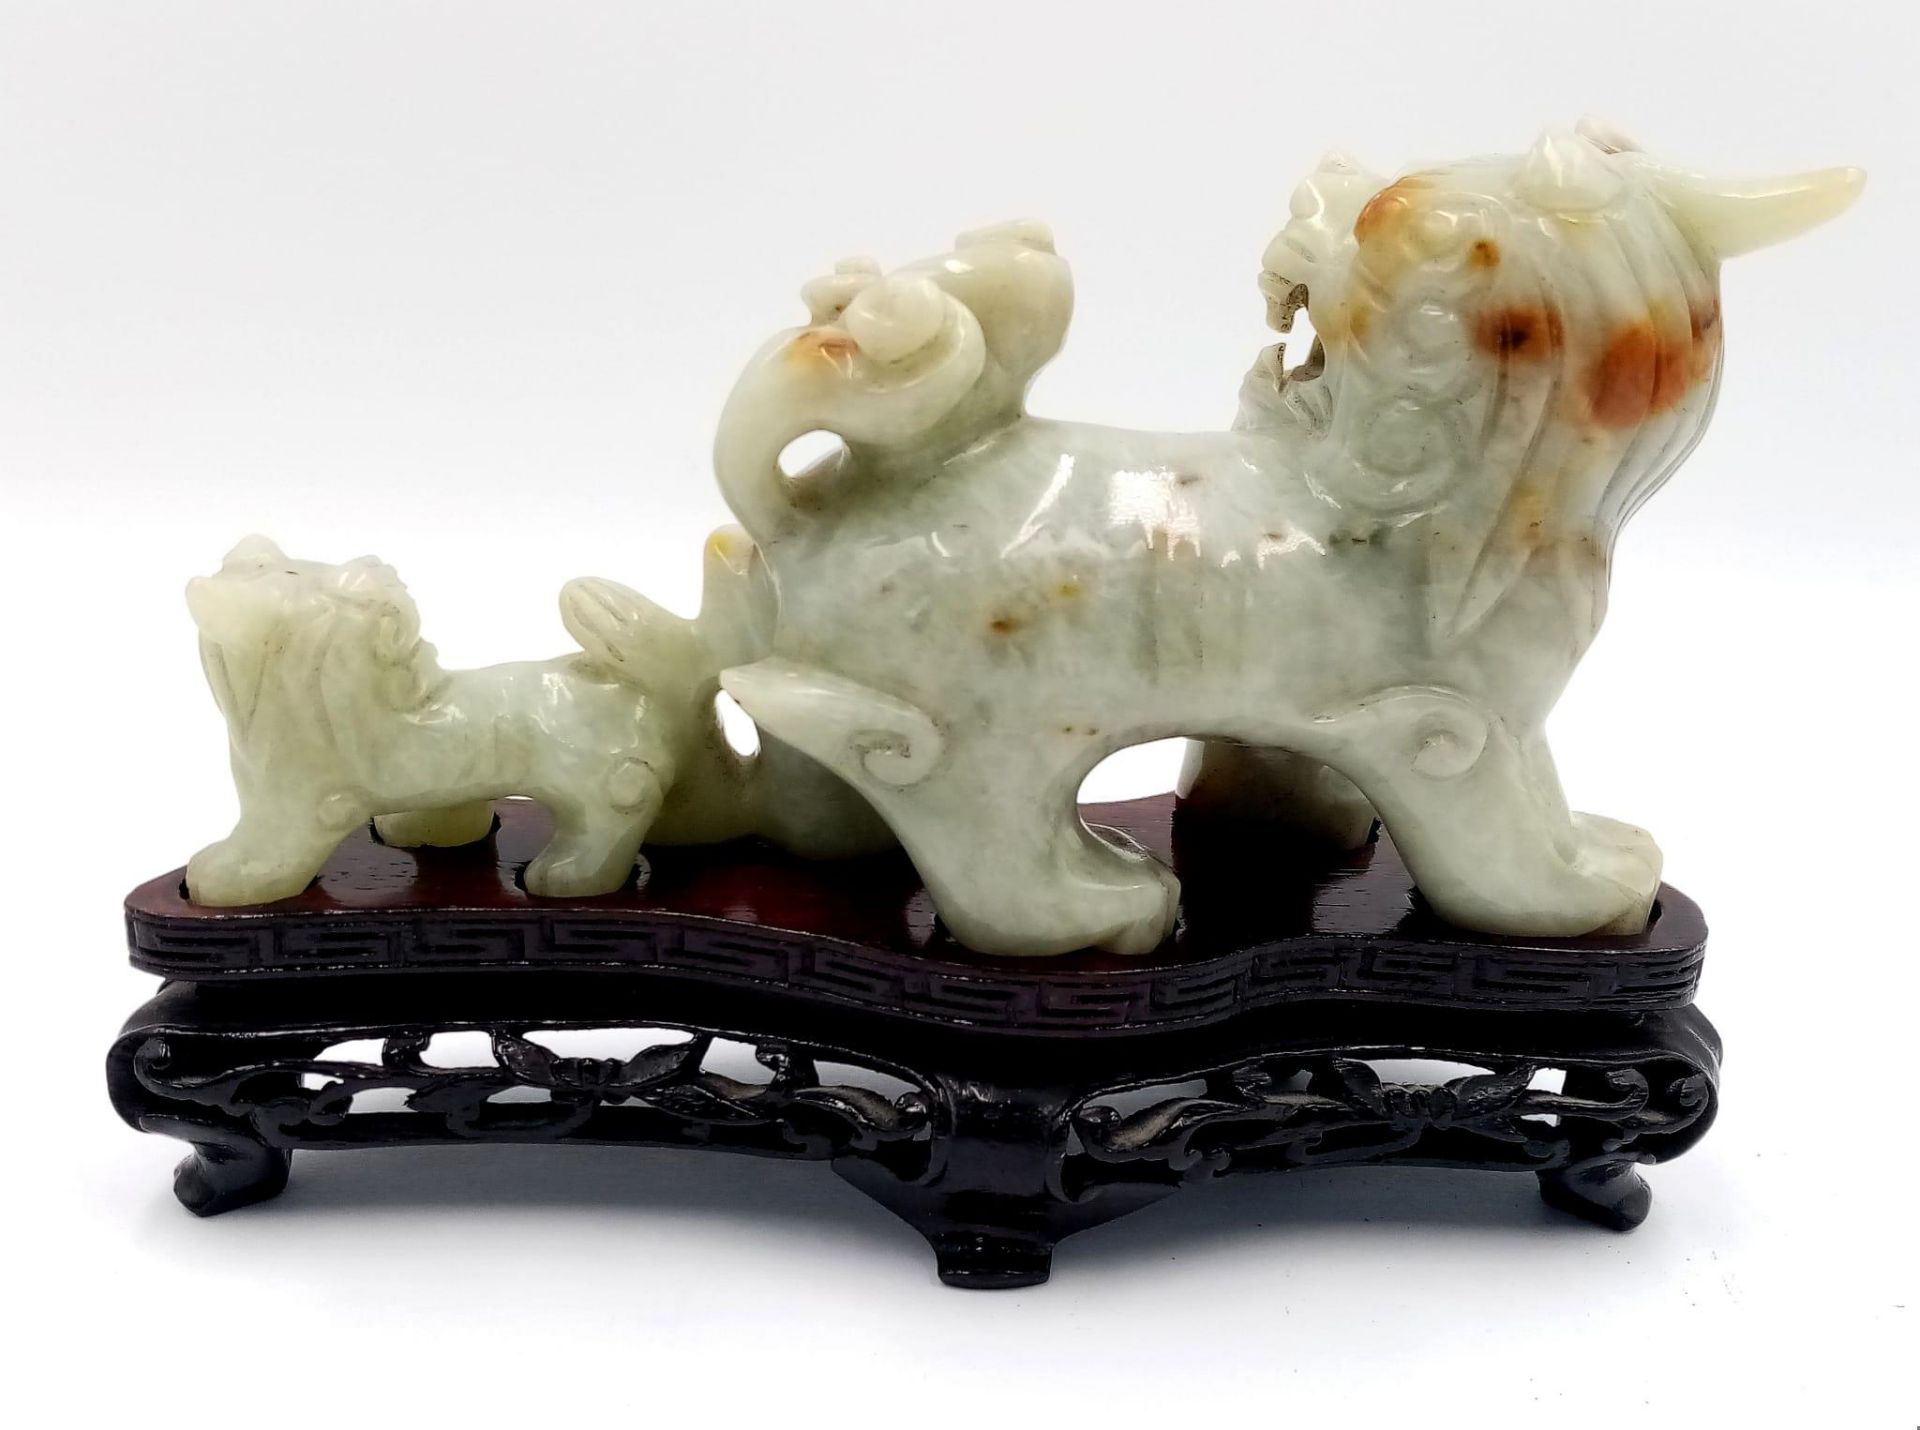 A Glorious Antique Chinese Hand-Carved Jade Fu Lion Figure - Sits on a bespoke lacquered wooden - Image 3 of 7